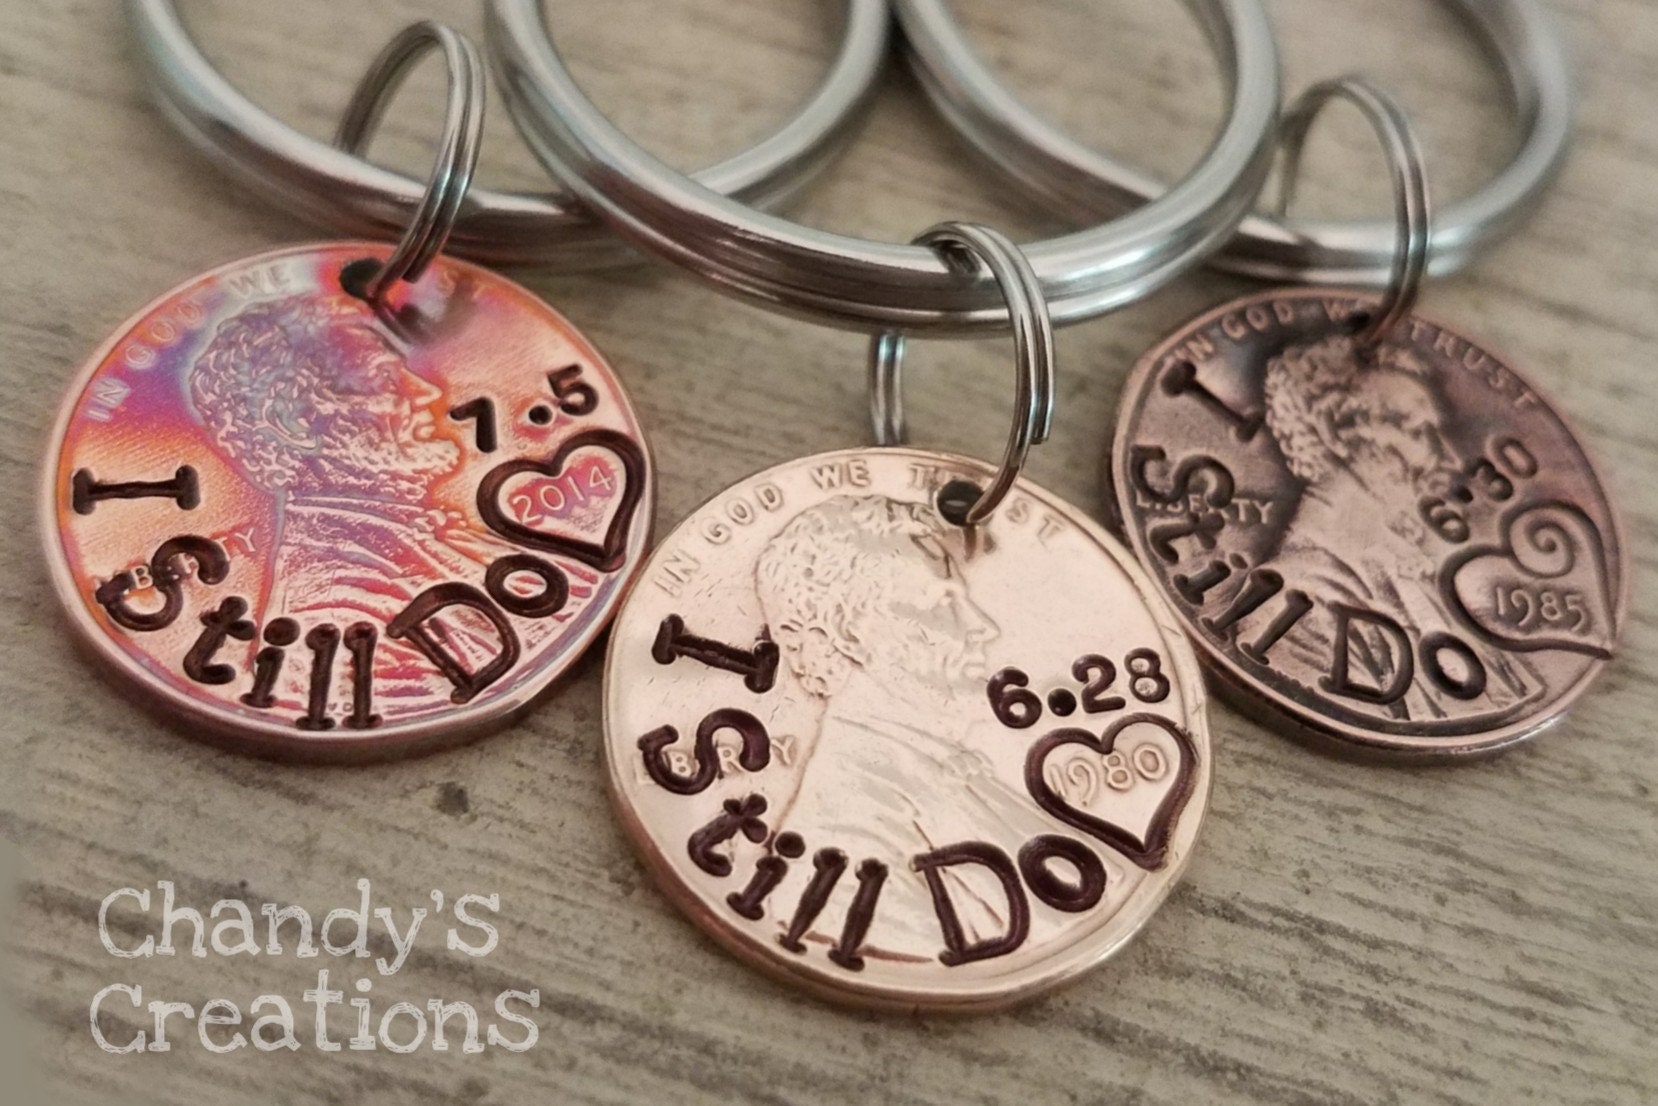 TheBrightPenny 1st Anniversary Gifts for Men 1 Year Together 2022 2023 2024 Lucky Penny Keyring Keychain I Still Choose You I Still Do Key Chain